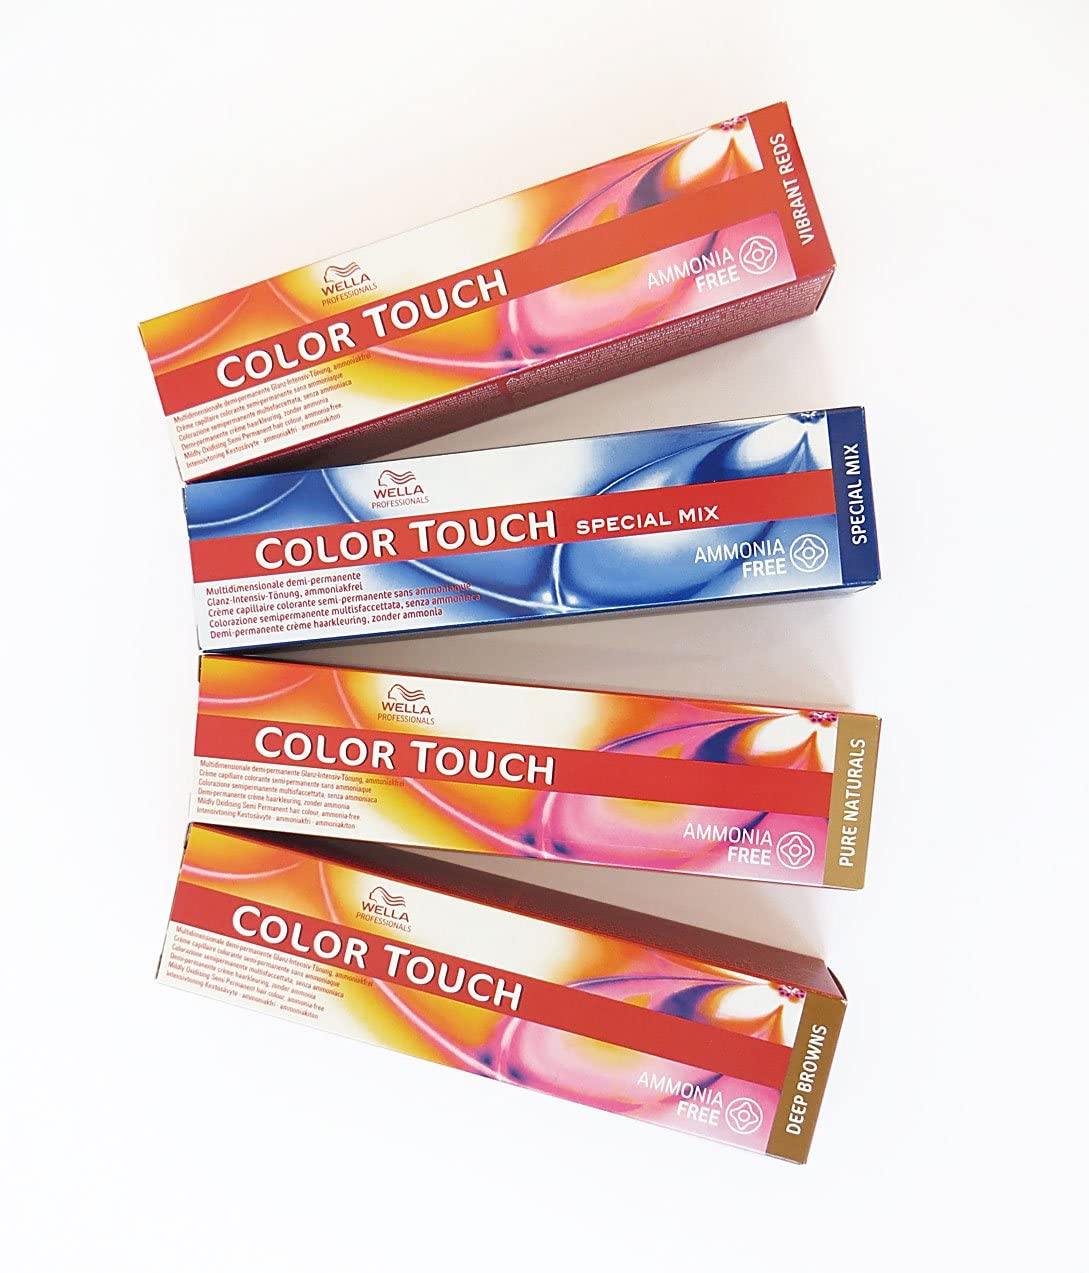 Wella Color touch 7/7 ammonia free